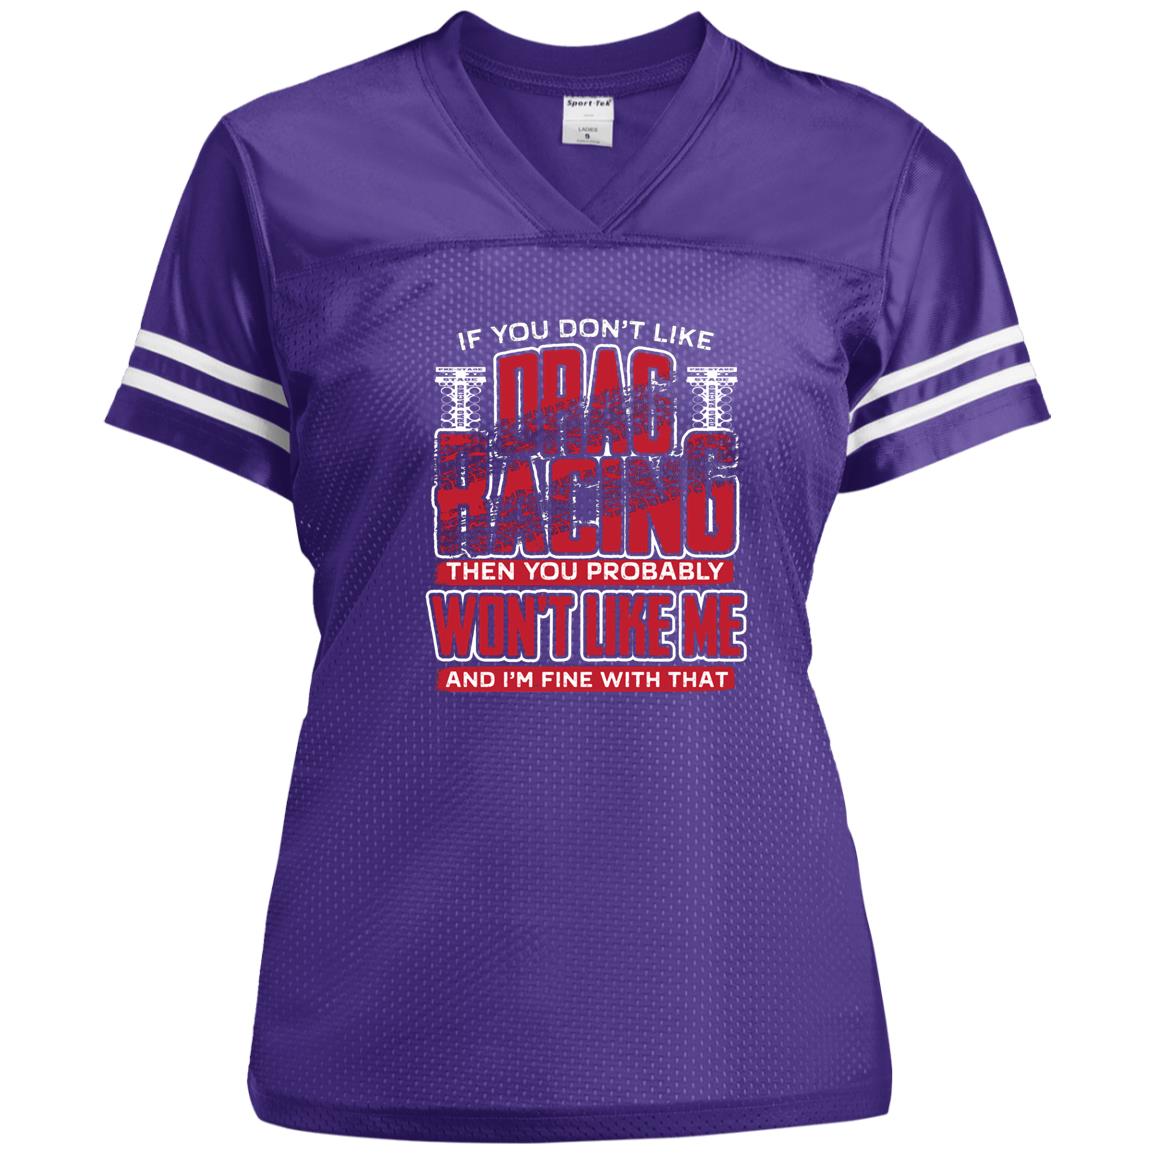 If You Don't Like Drag Racing Ladies' Replica Jersey